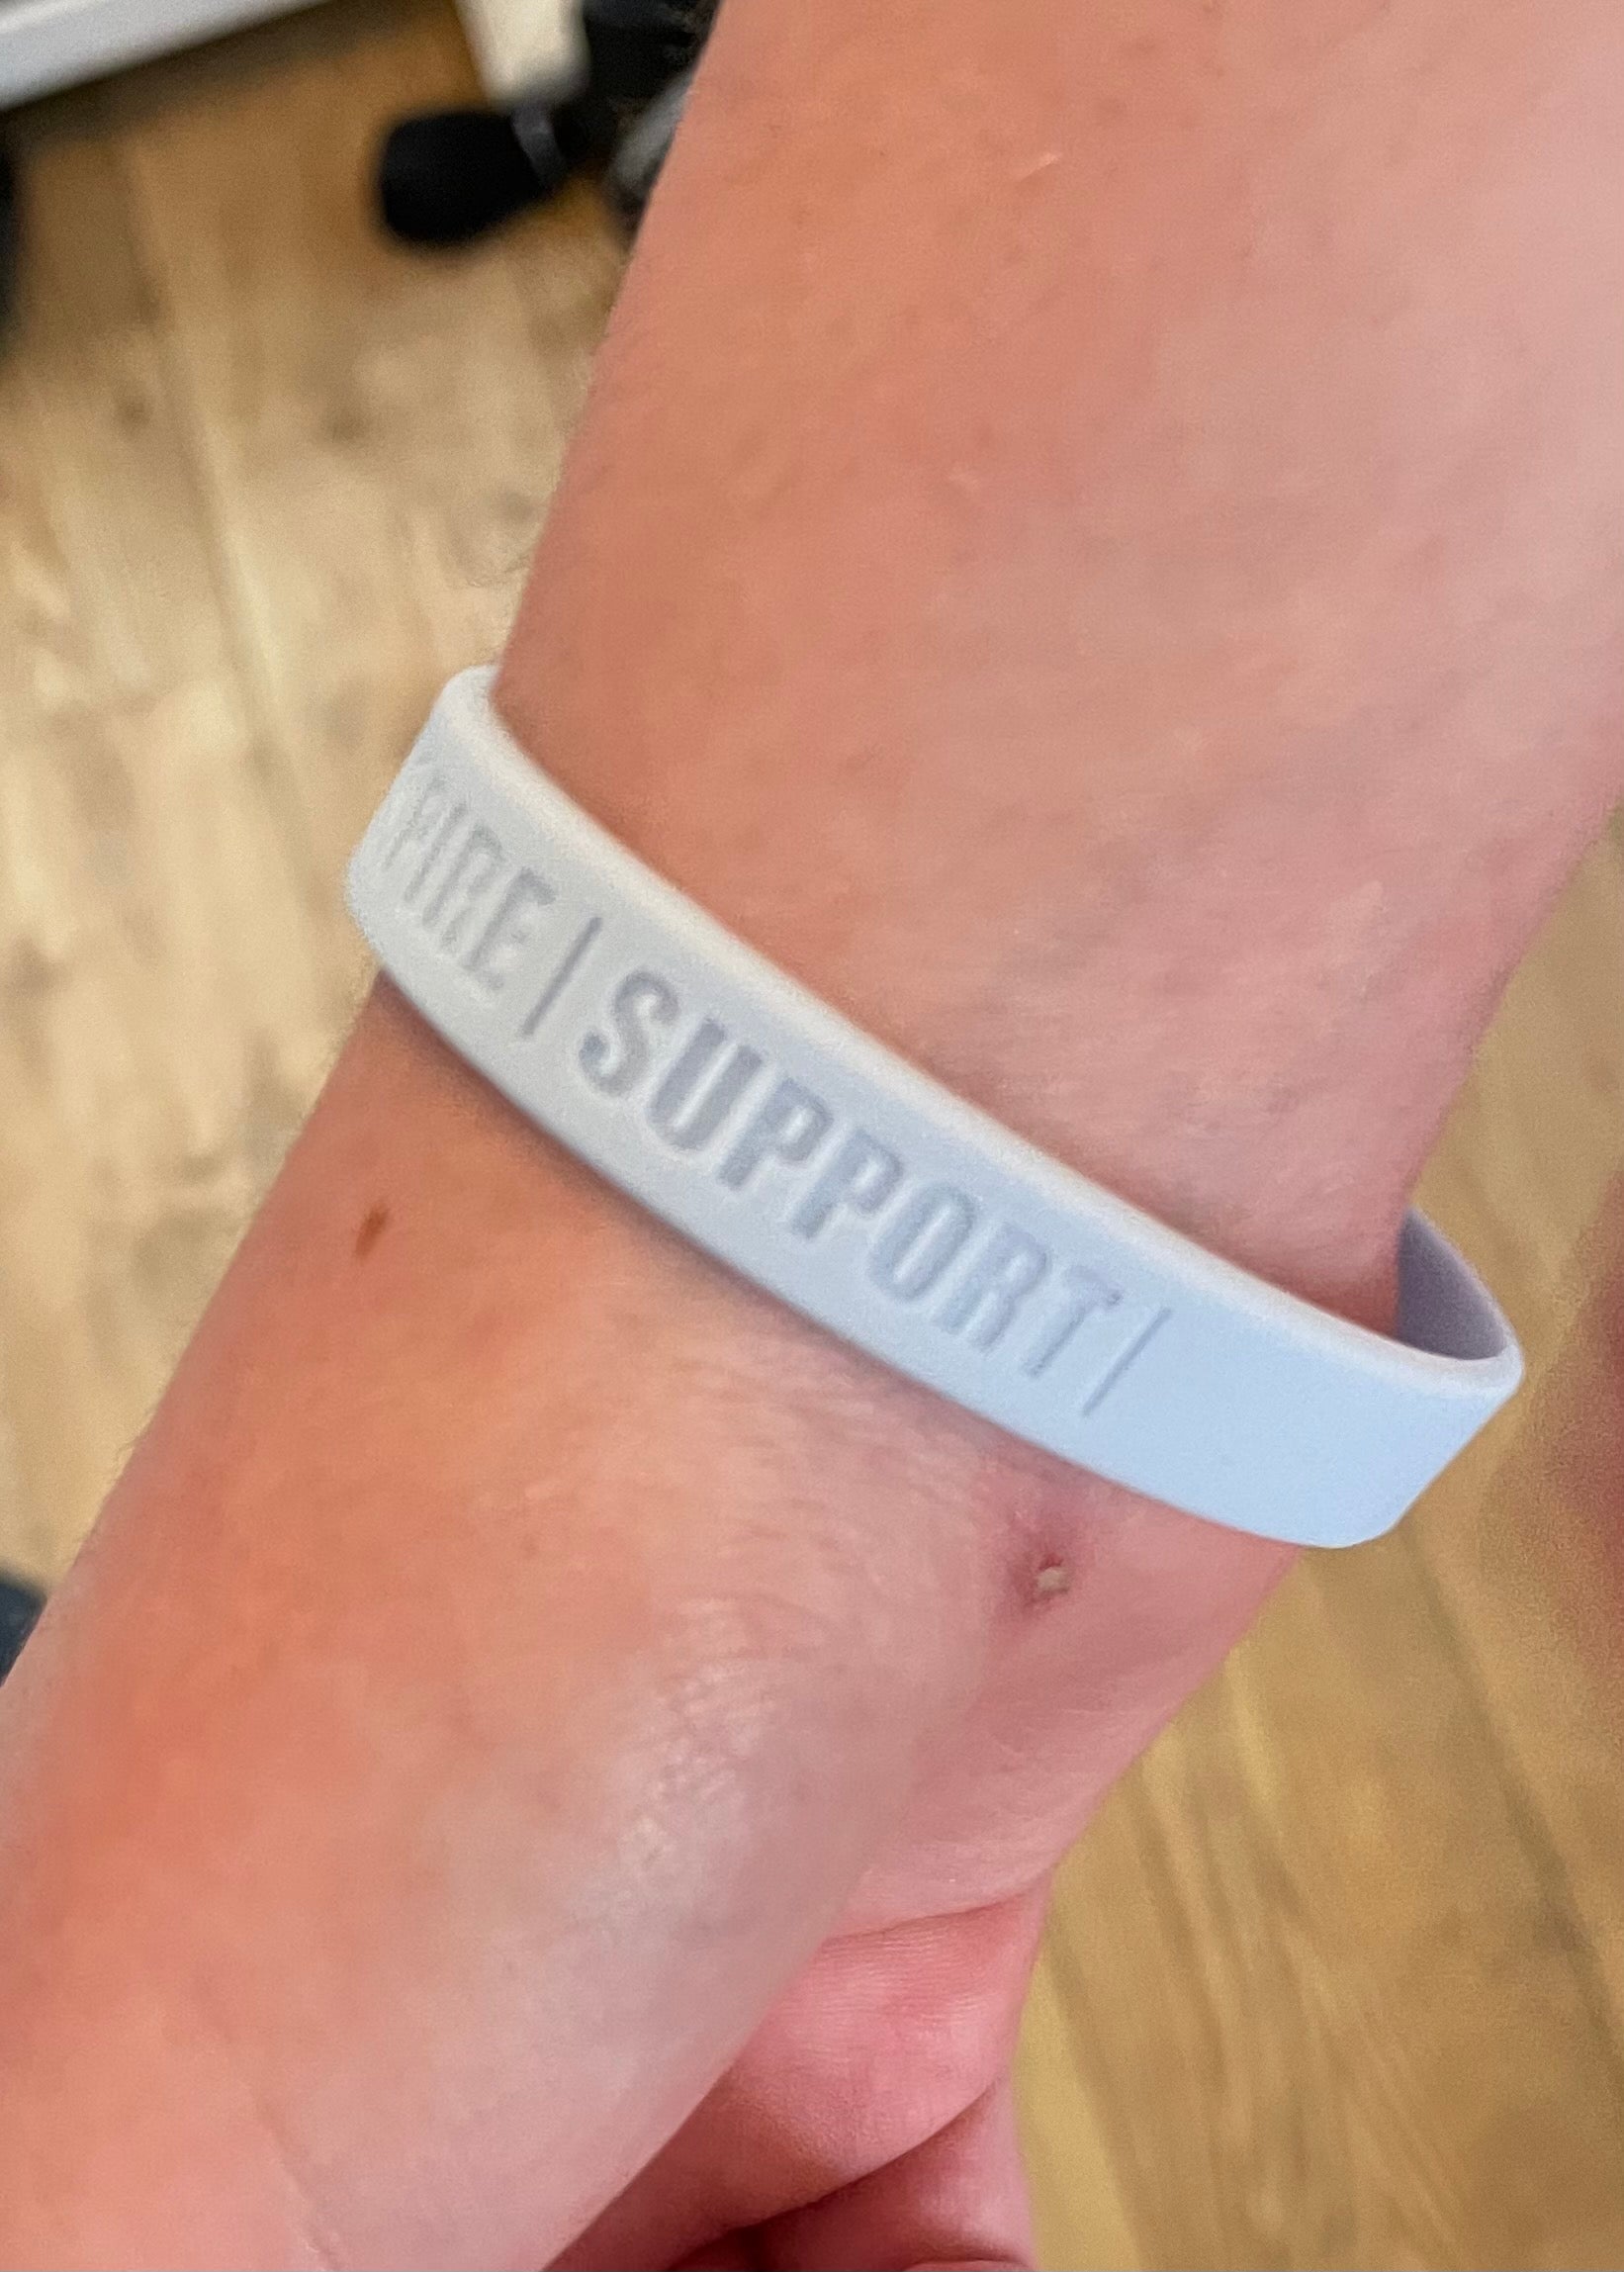 Not Just Crew 'Wristband' (Support Us Supporting You)